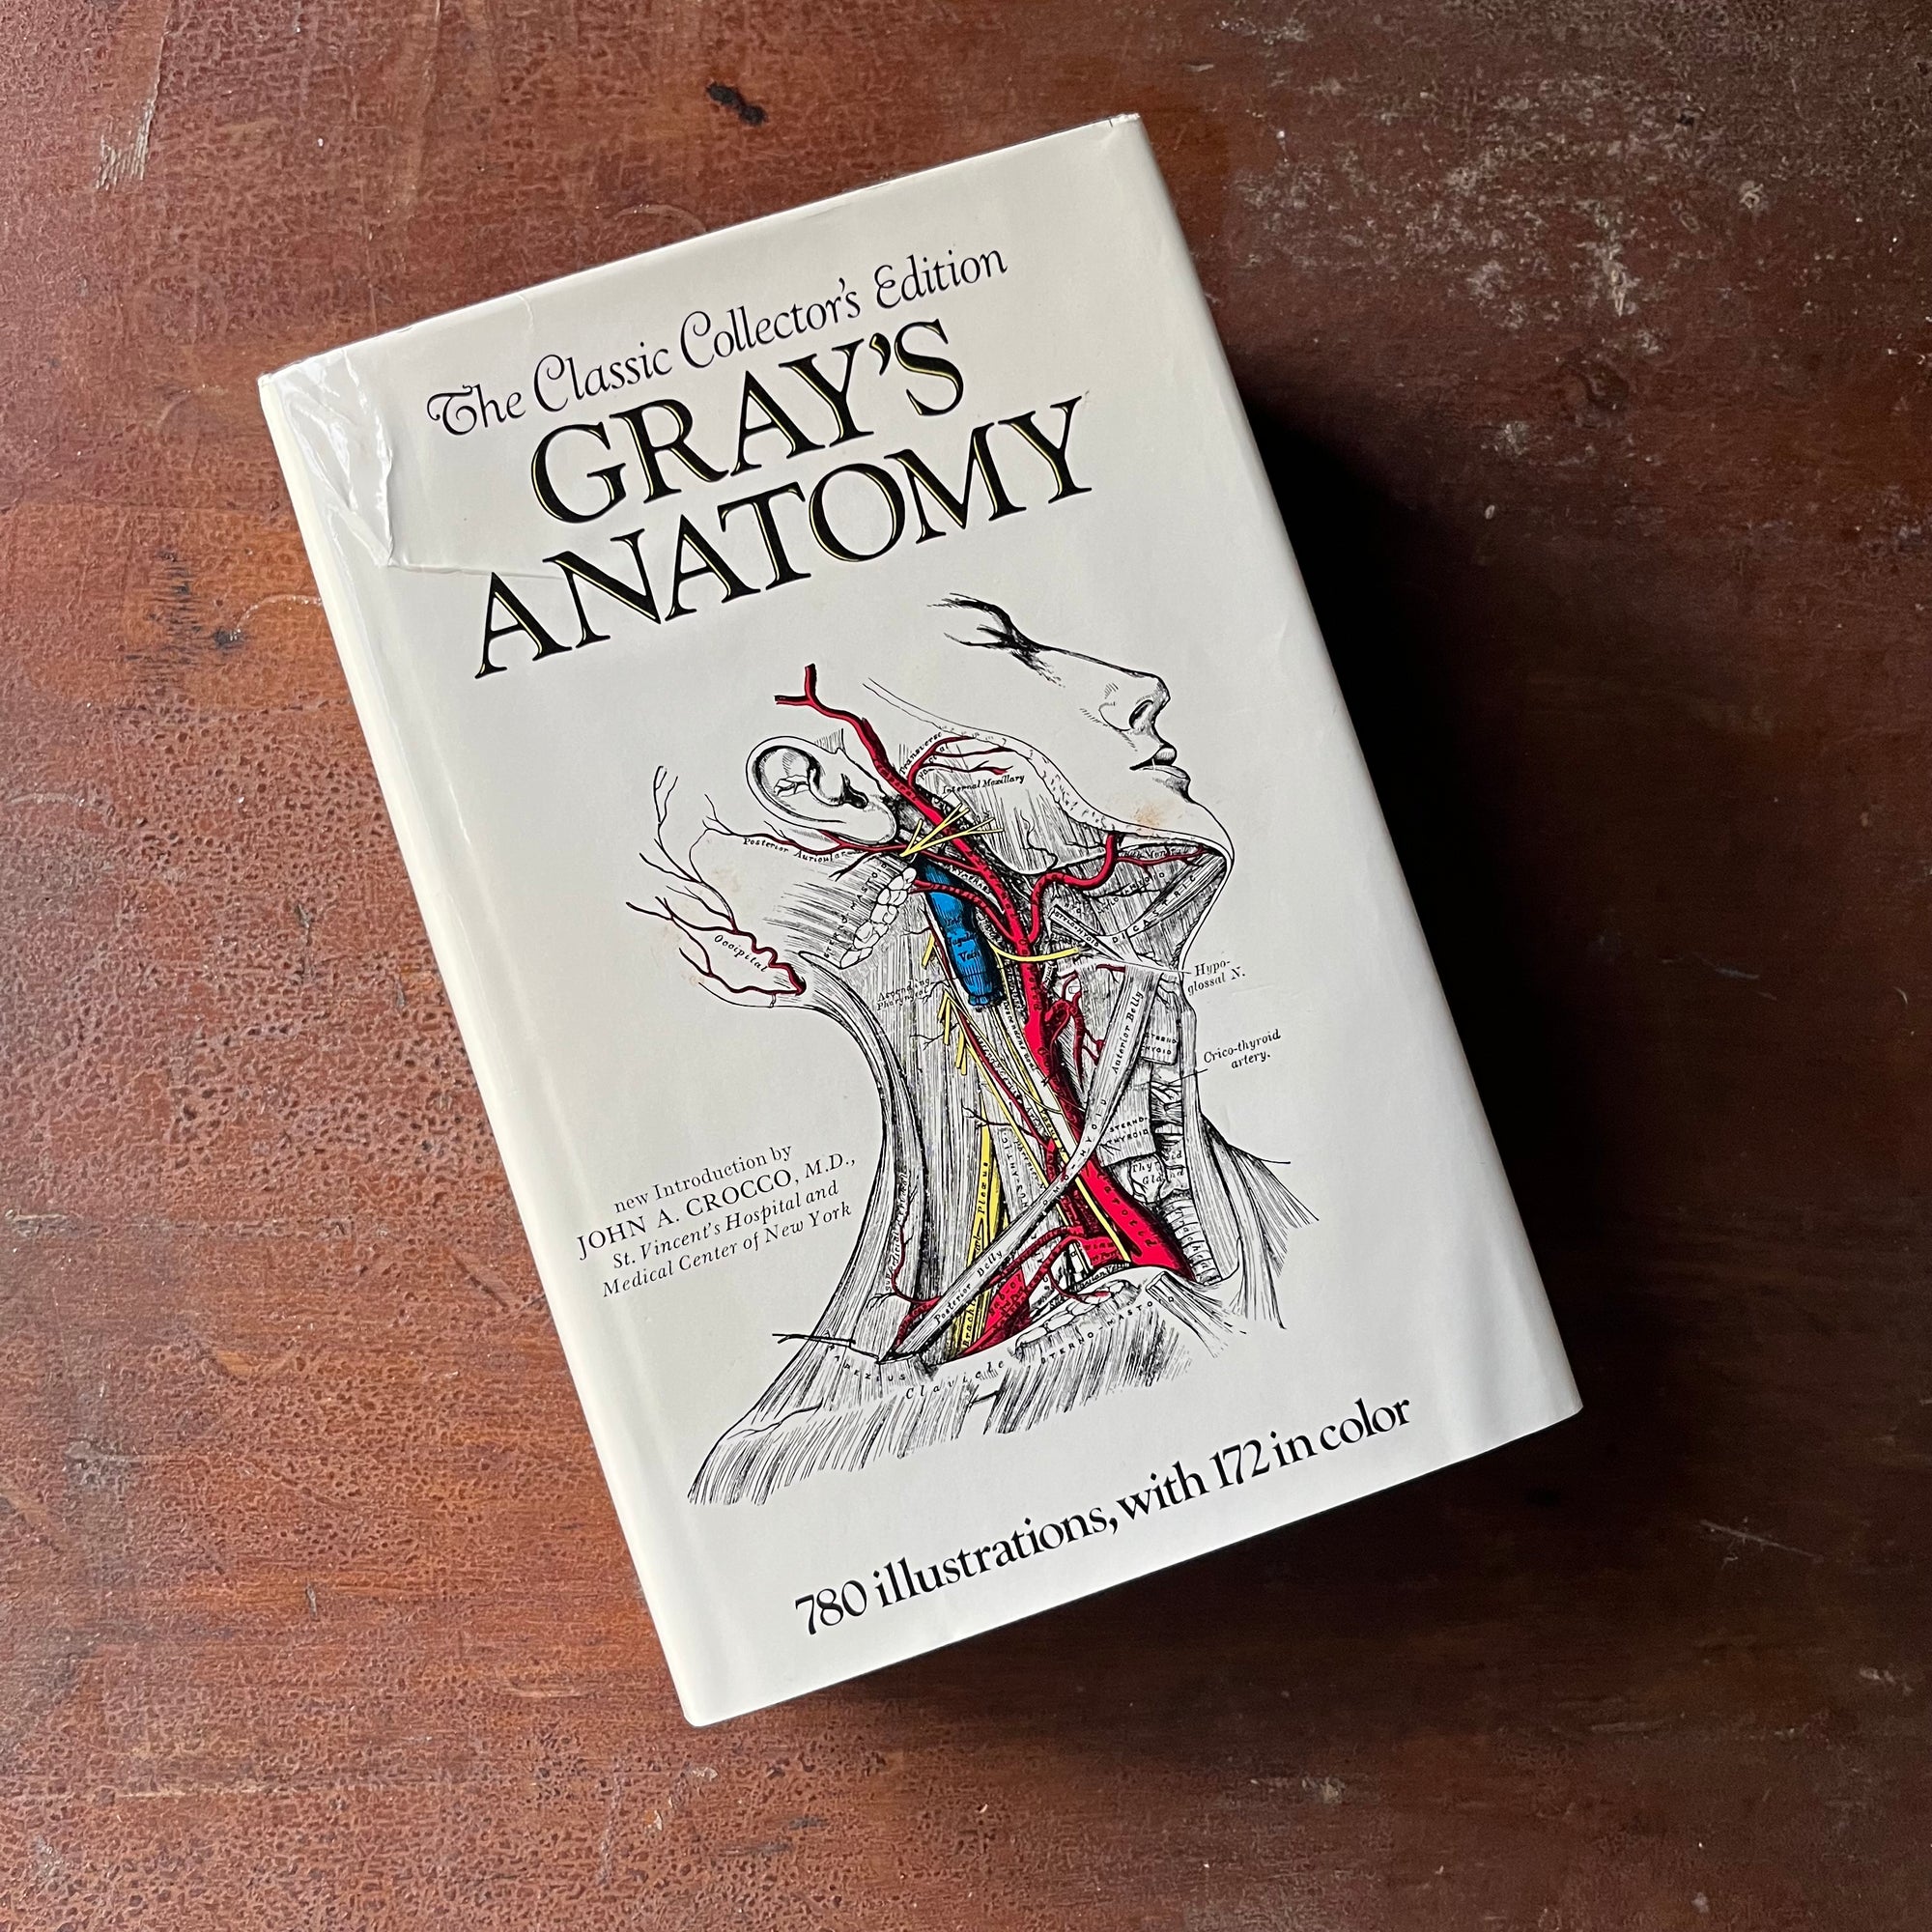 vintage medical illustration book - The Classic Collector's Edition of Gray's Anatomy by Henry Gray with 780 Illustrations - view of the dust jacket's front cover with an illustration of the human neck in color